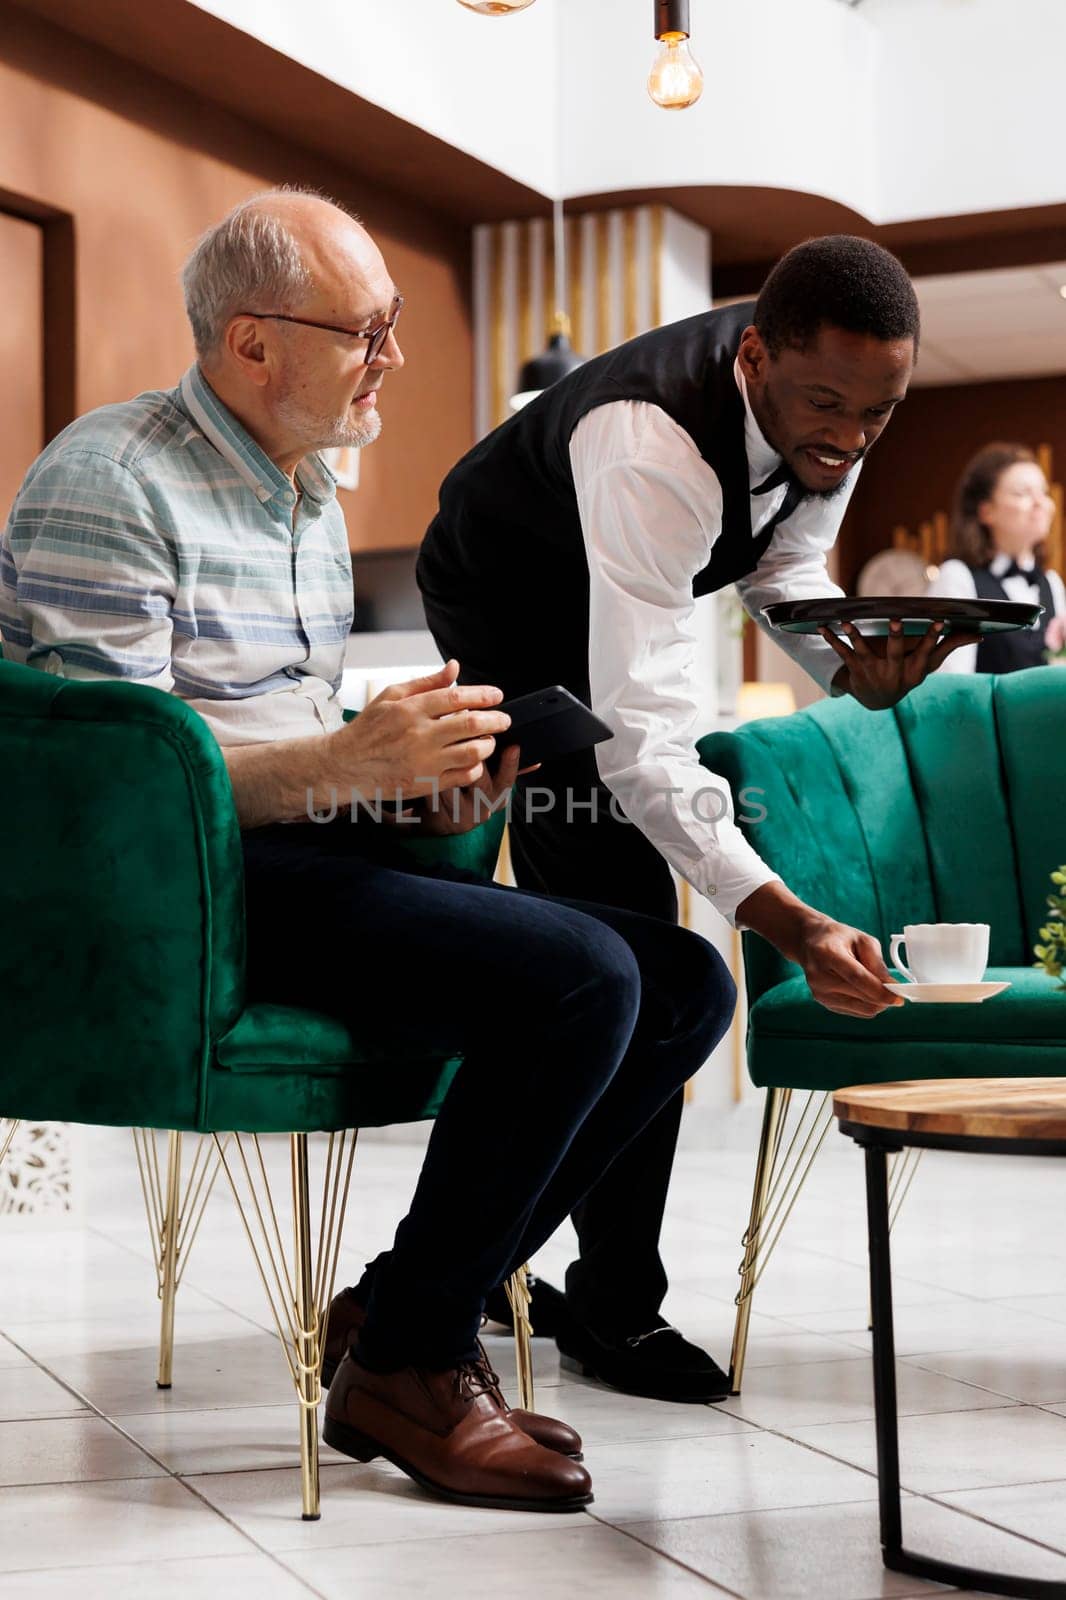 In lounge area, nice waiter serving cup of tea to elderly male tourist seated on couch with tablet. Retired senior man sitting on cozy sofa and being attended by african american staff in hotel lobby.